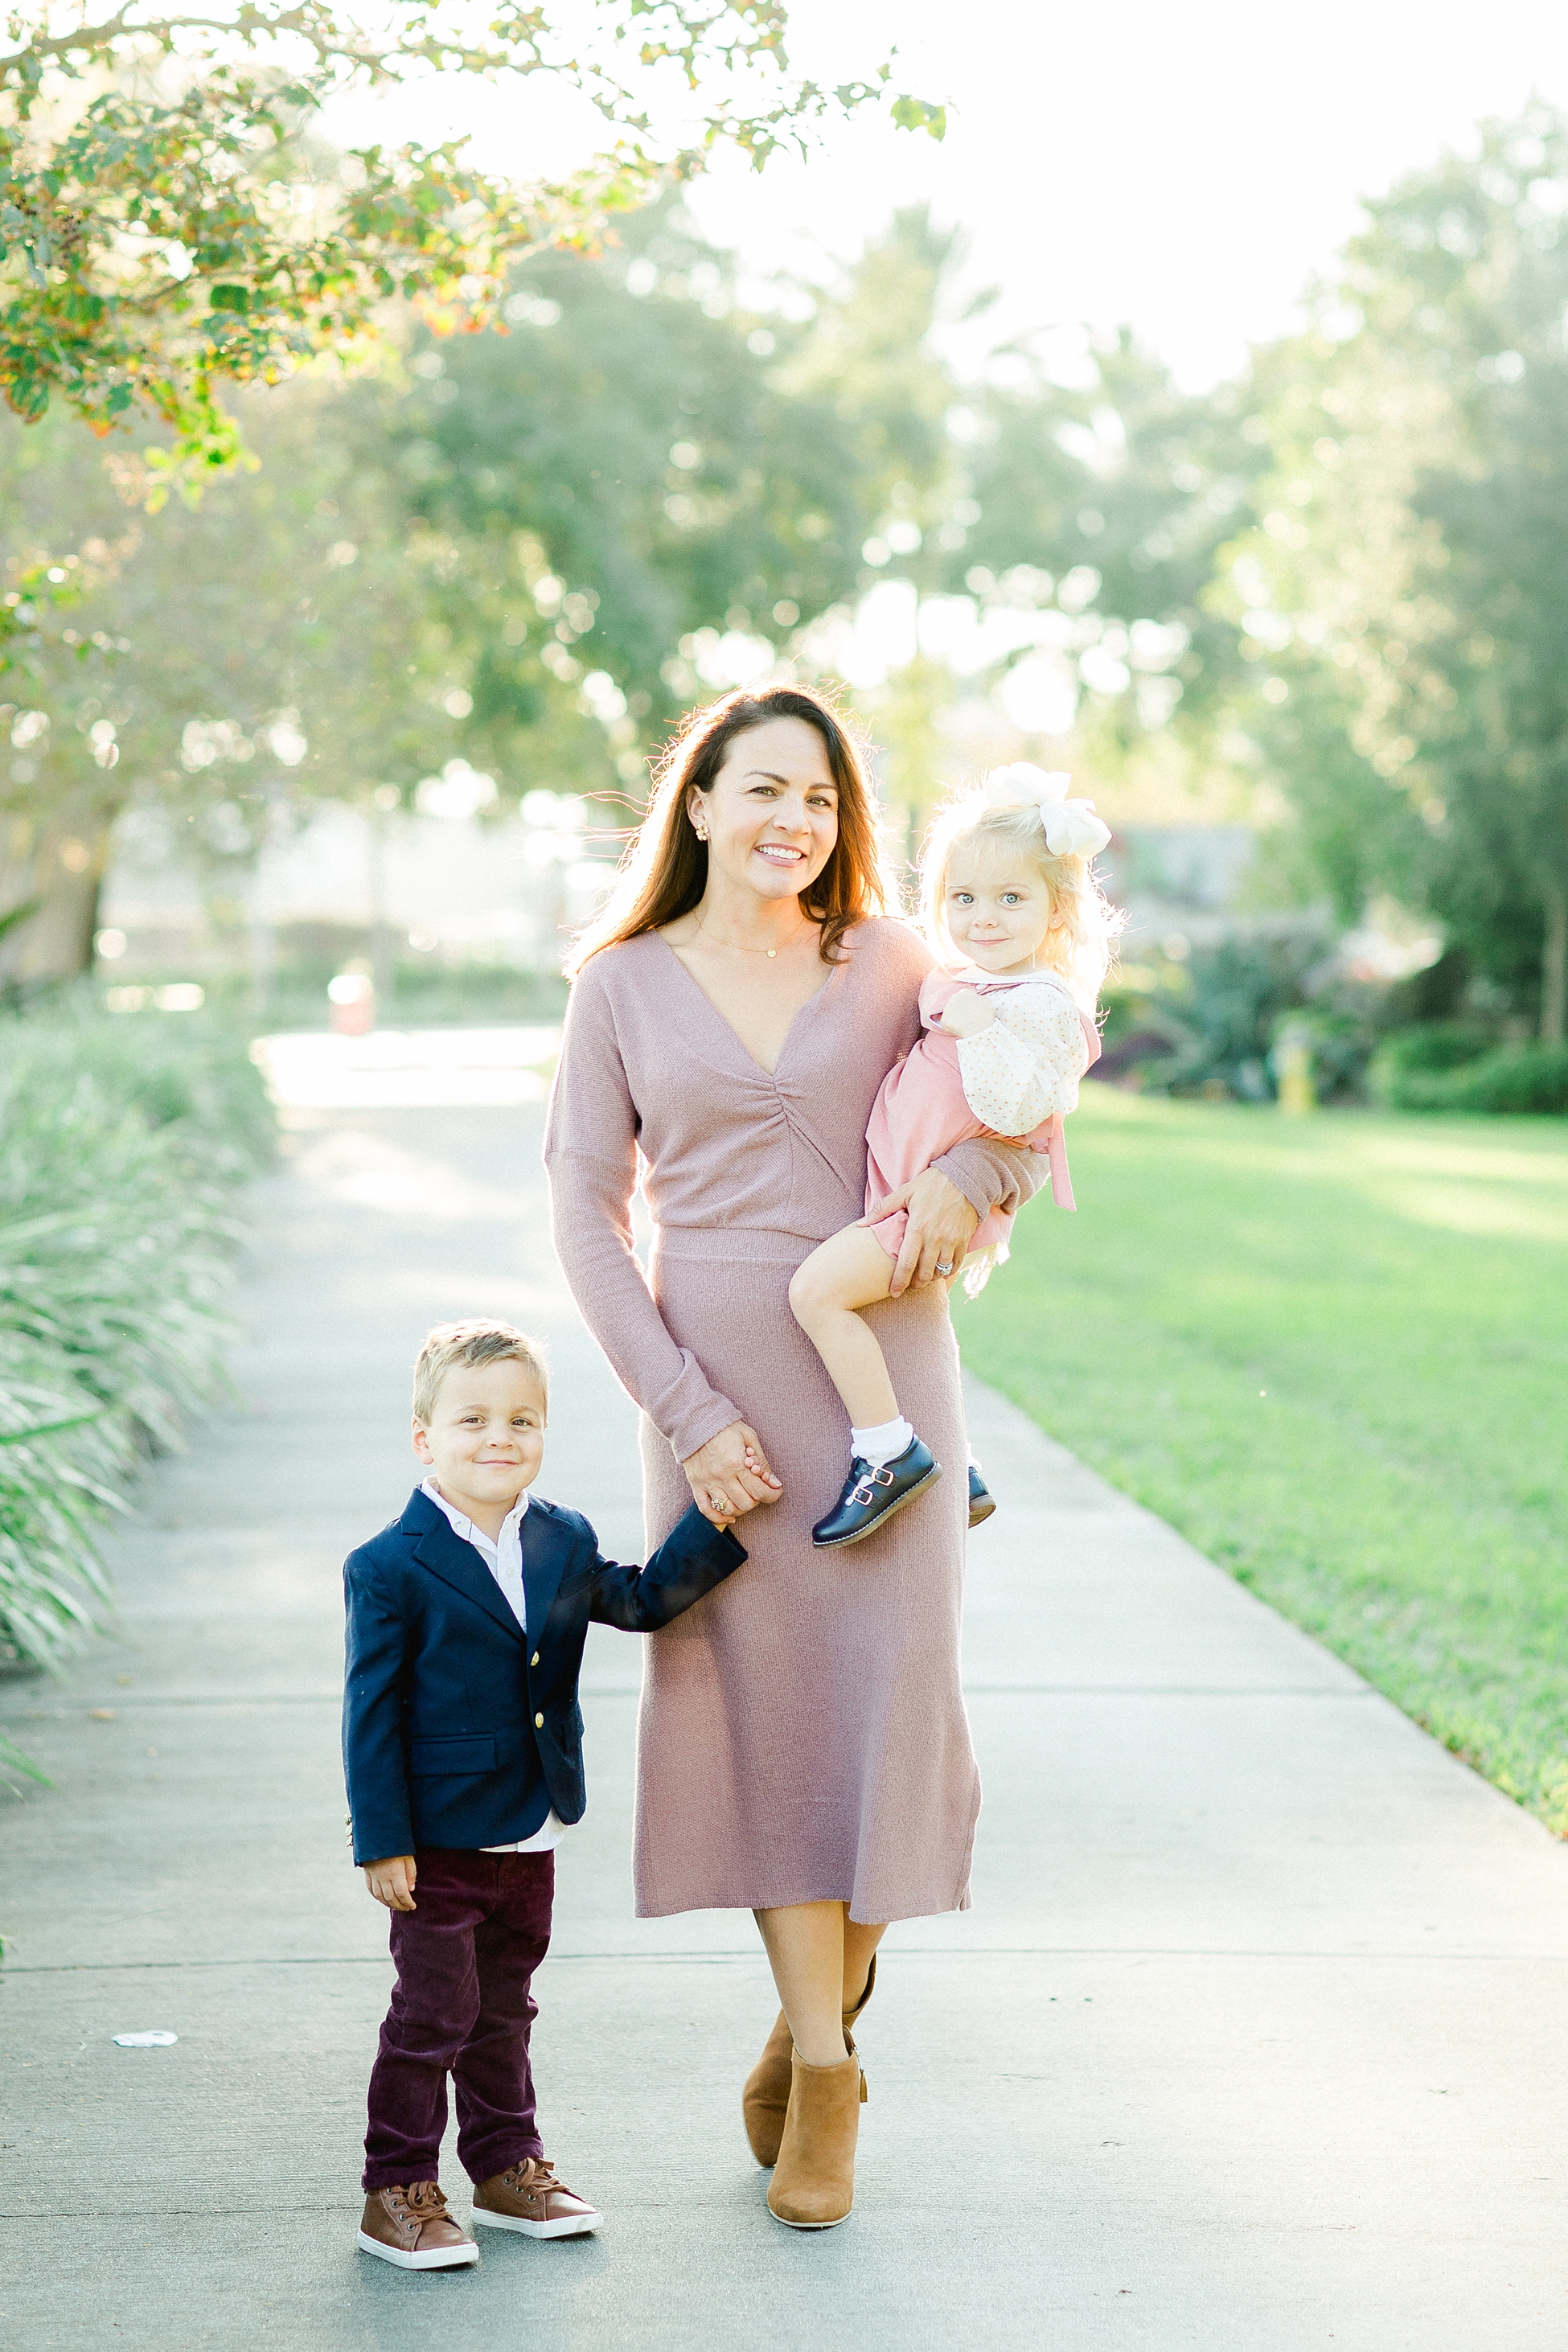 St. Petersburg Family Photographer | © Ailyn La Torre Photography 2018